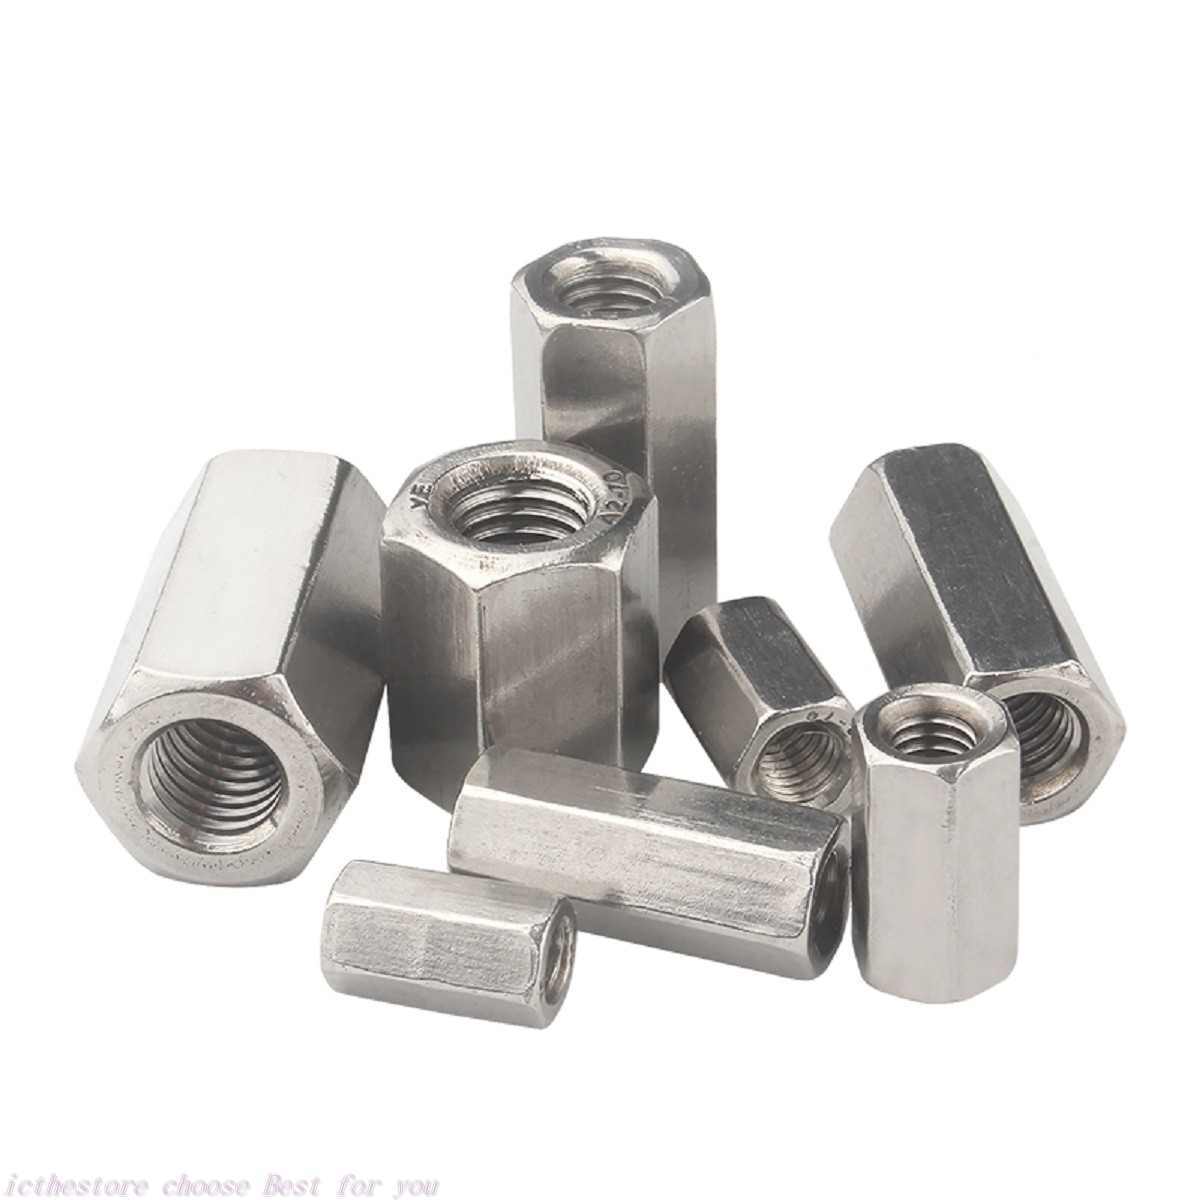 M3-M10 304 Hex / Round Long Connector Joint Nut Coupling Nuts